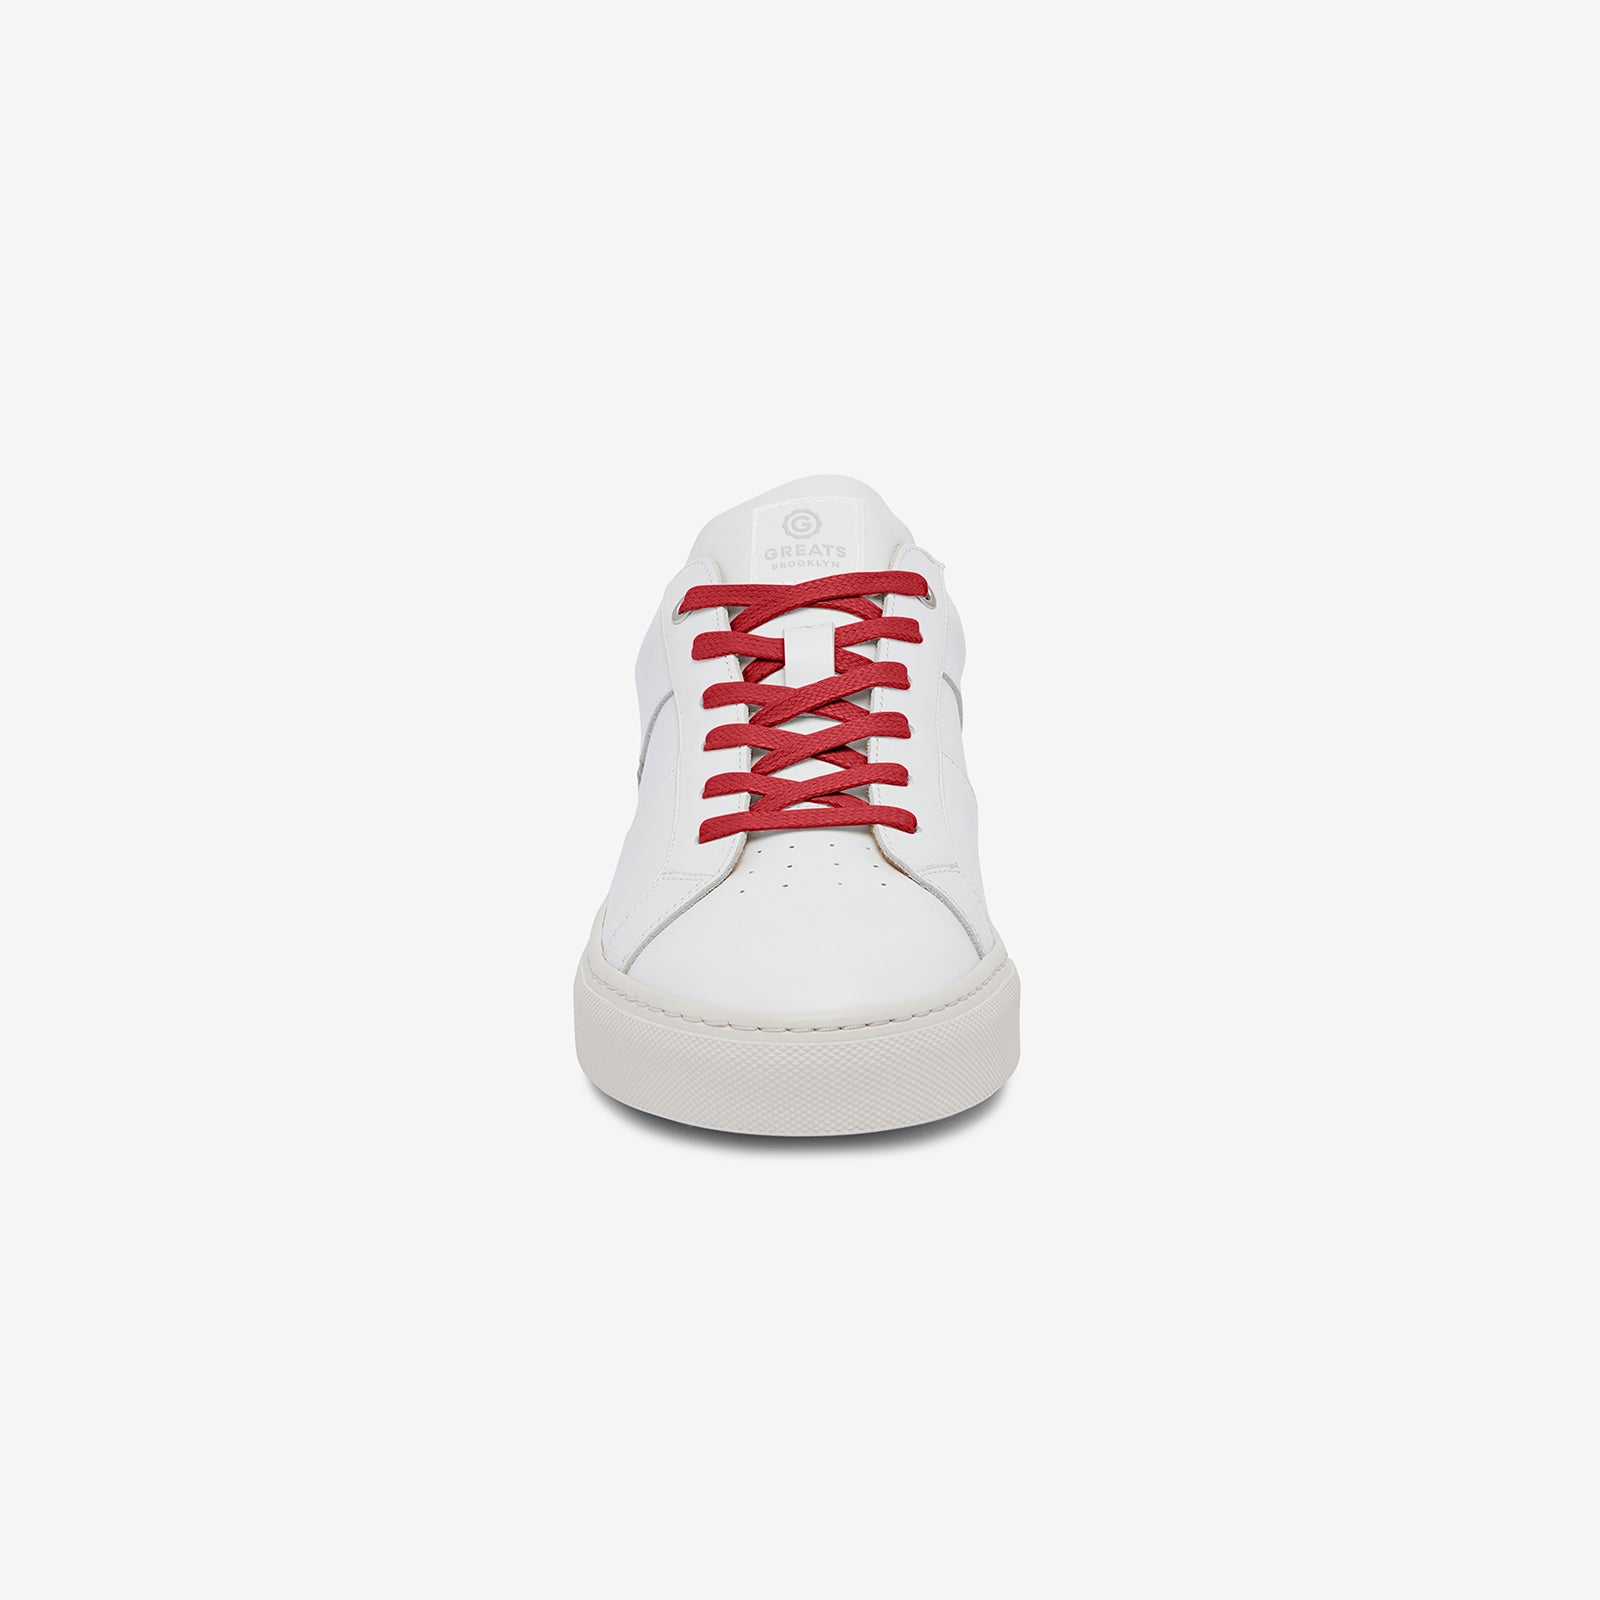 Premium Photo | Red sneakers or sneakers made of natural suede on a store  shelf white flexible sole and red laces shoe shop youth comfortable  fashionable shoes newest concept the best red